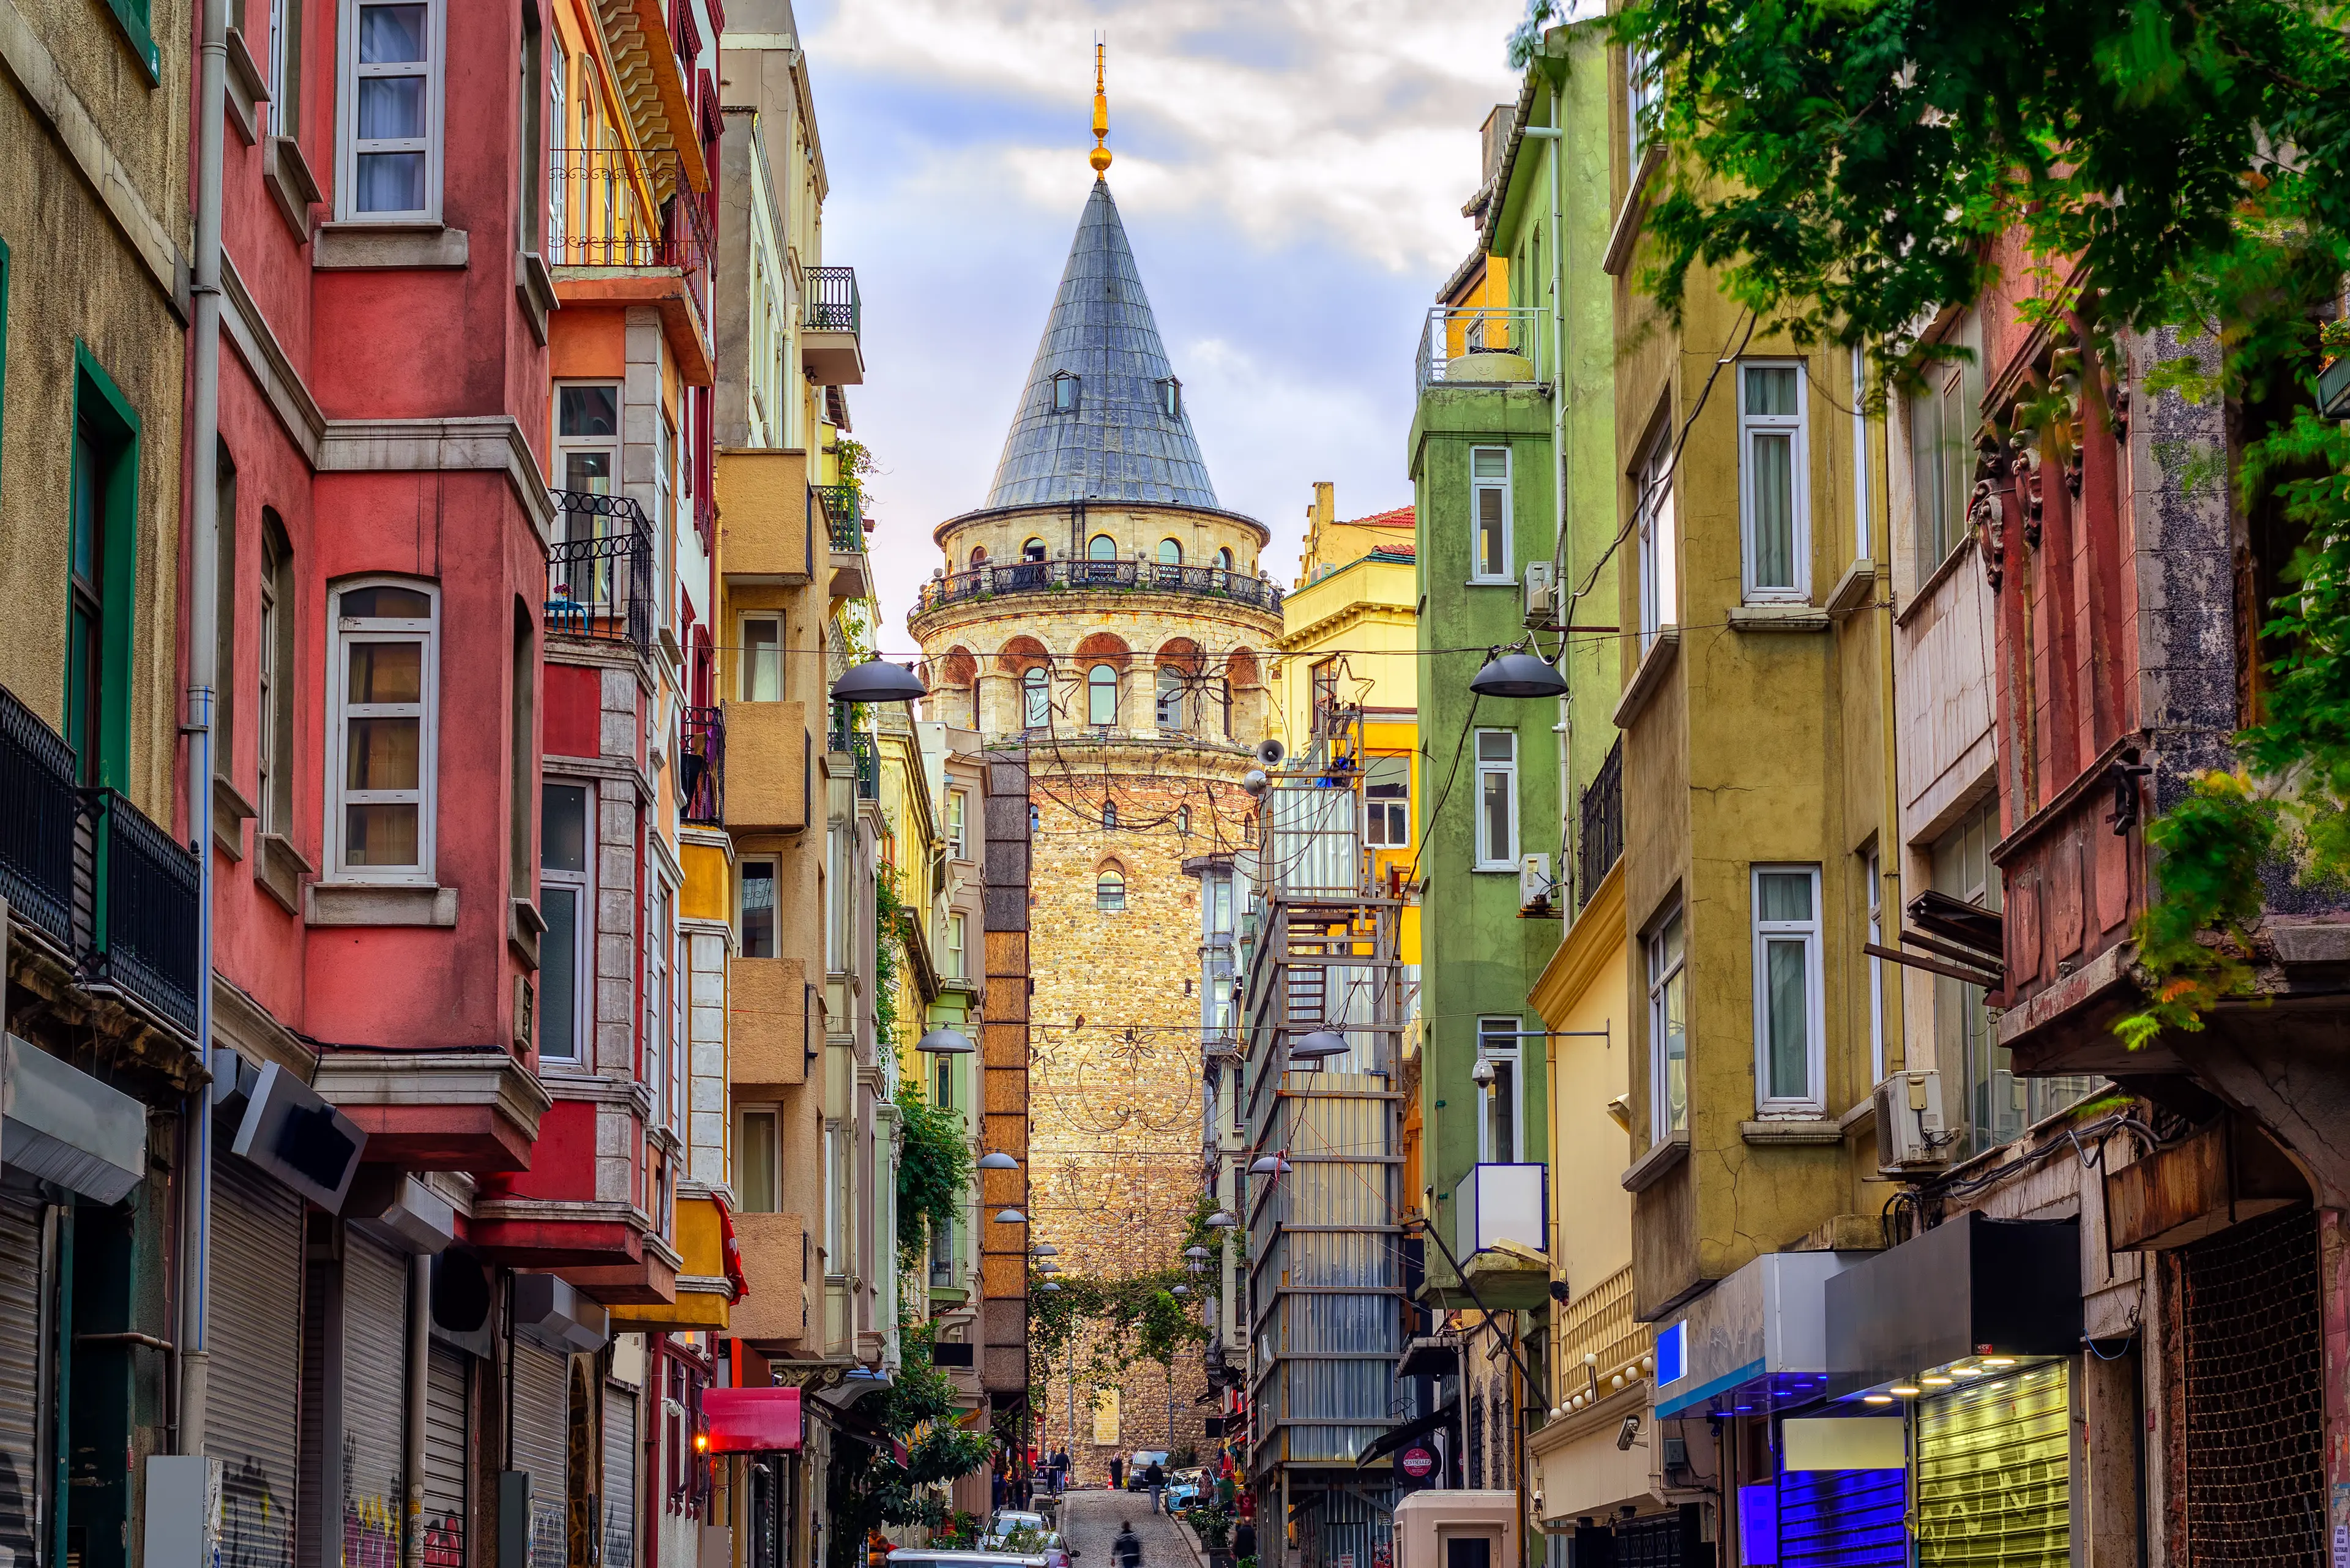 4-Day Local Food, Wine and Sightseeing Tour in Istanbul with Friends